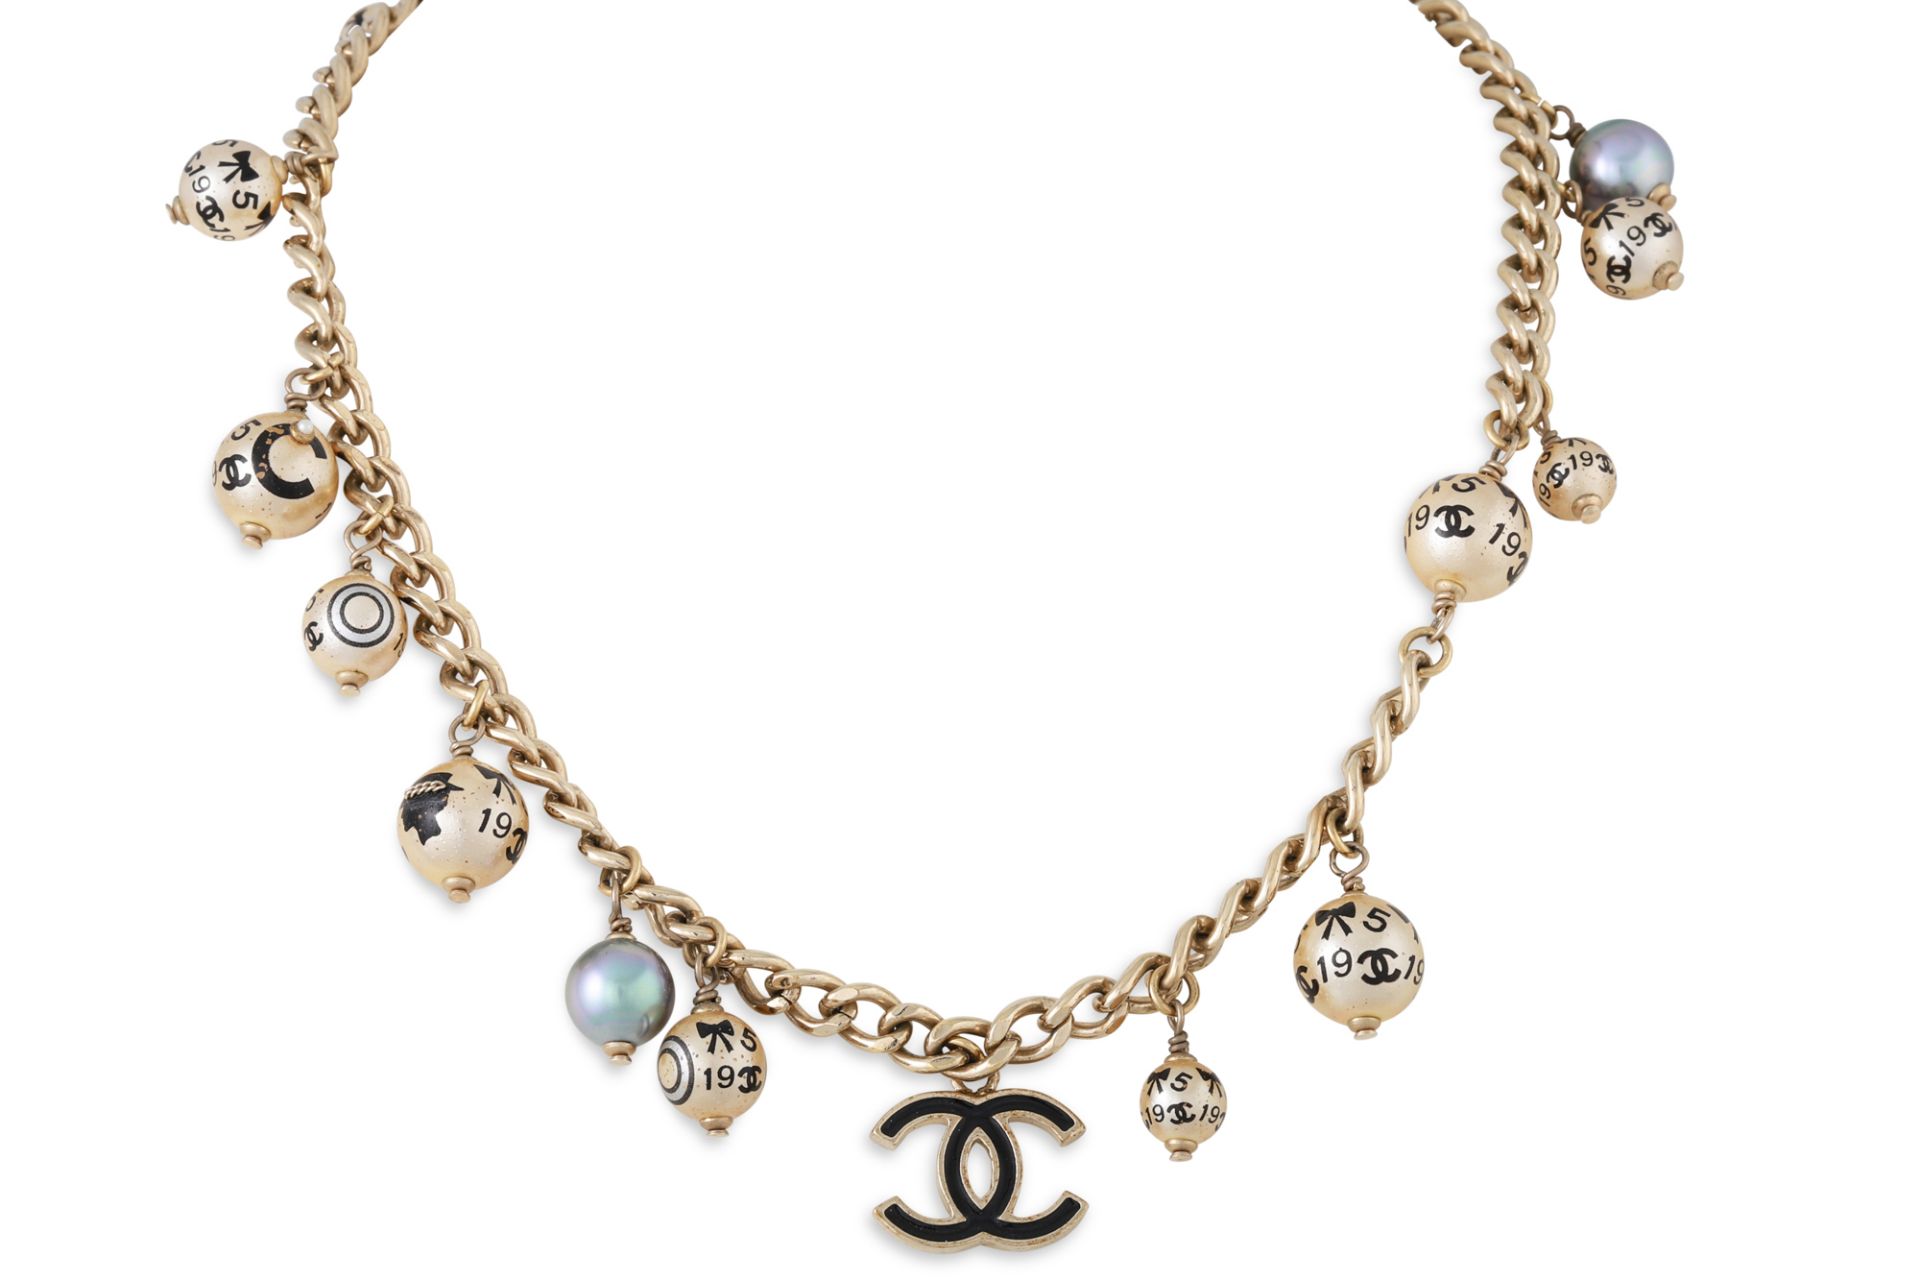 A CHANEL BEADED CHARM NECKLACE, the curb link chain suspending faux pearl and a double C charms,